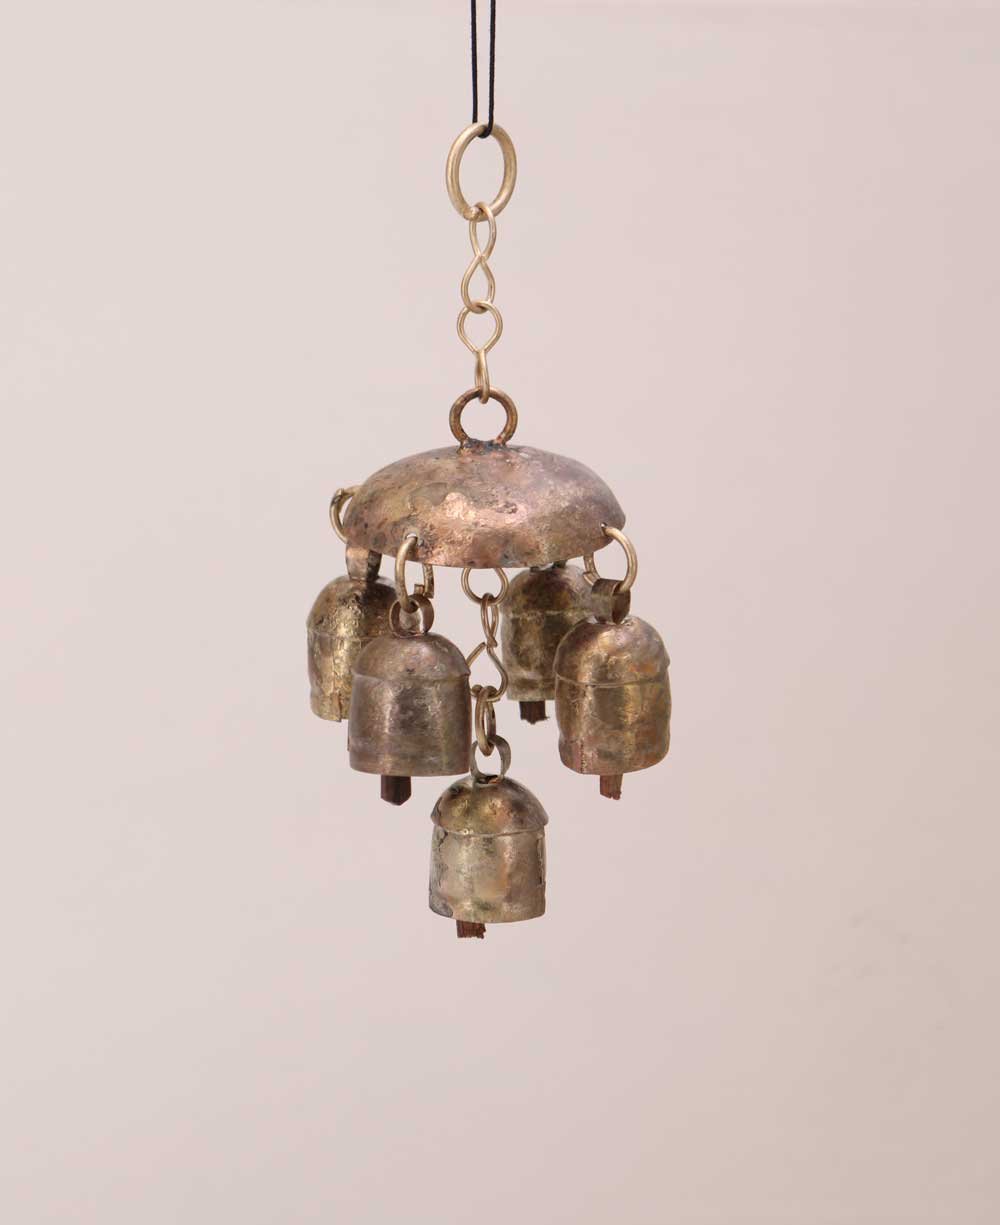 Small Hanging 5 Bell Chime, Fairtrade - Wind Chimes